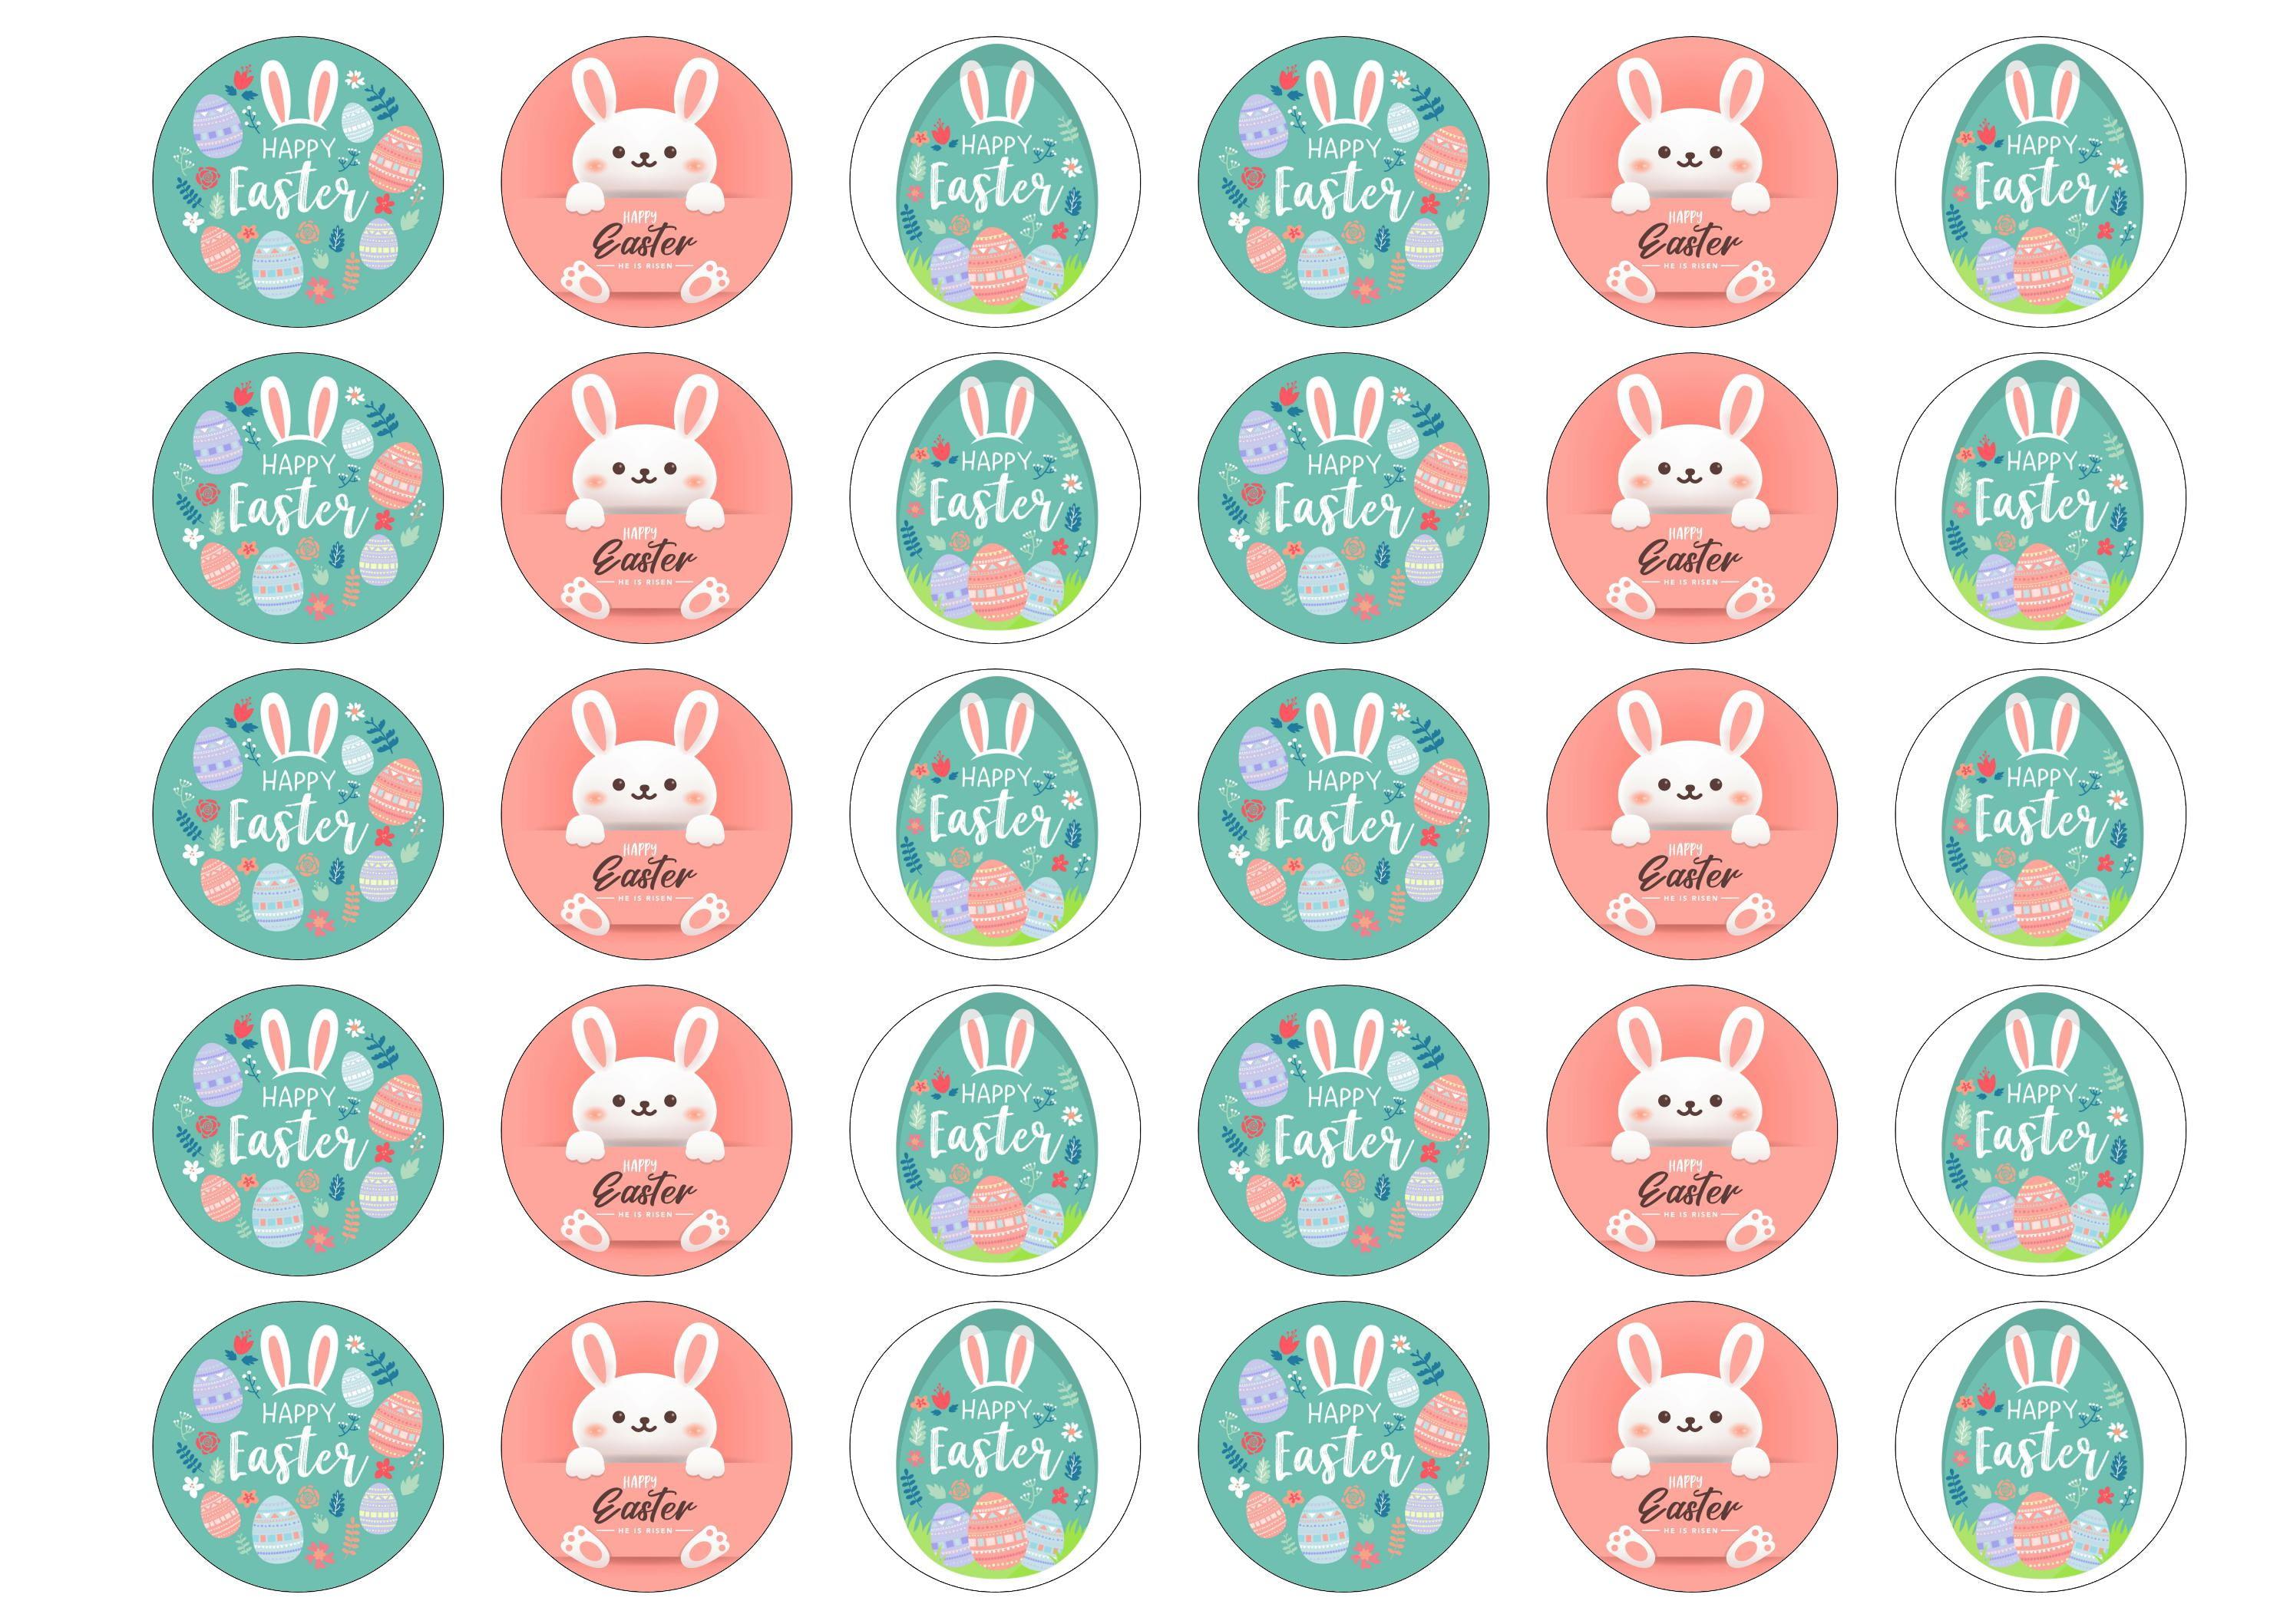 30 edible cupcake toppers with a cute Easter Bunny and Easter Eggs